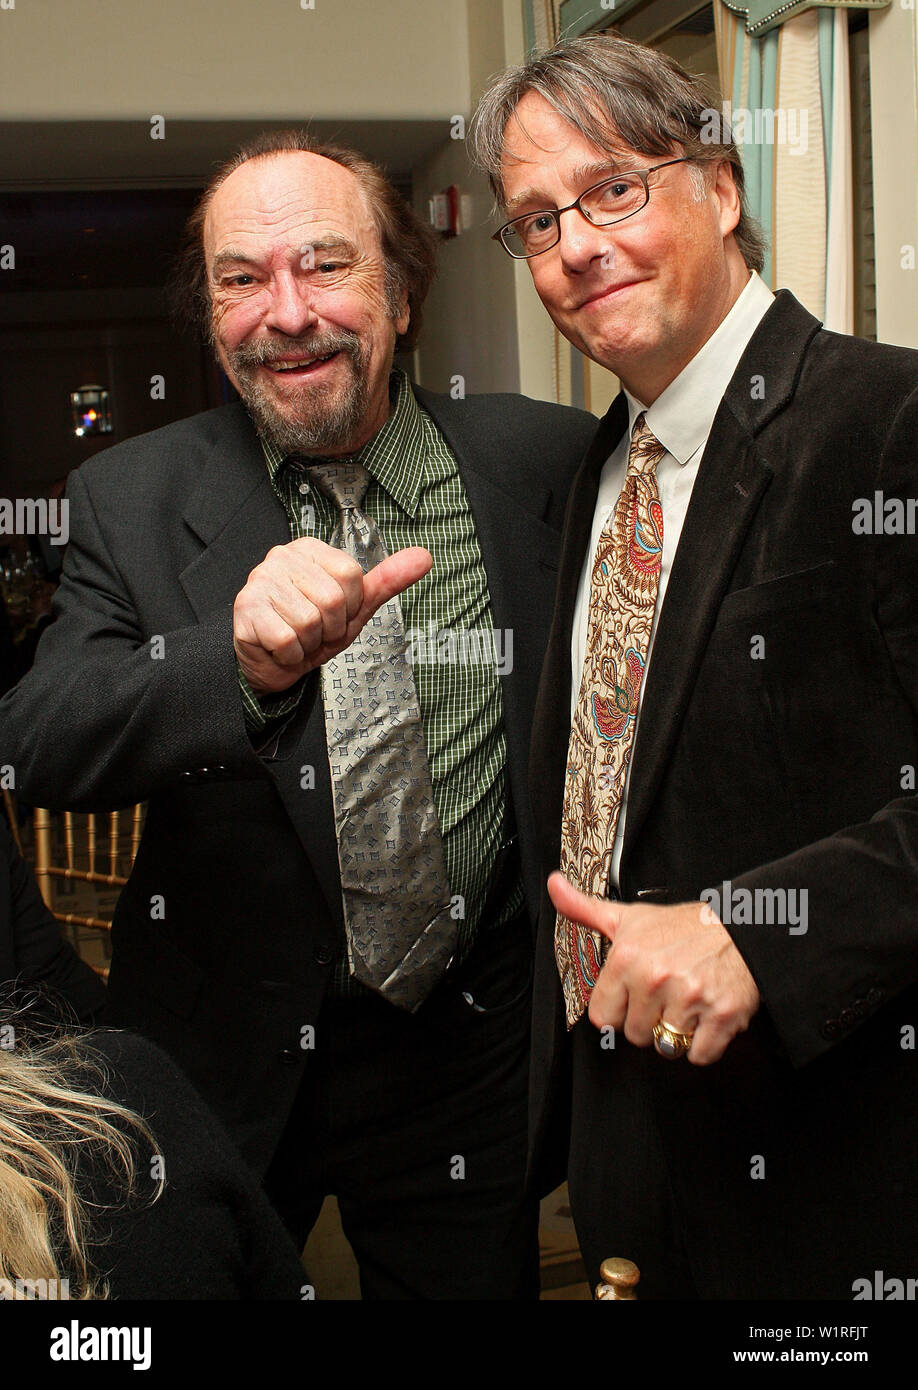 New York, NY - February 22:  Actor, Rip Torn, Director, Mitchell Lichtenstein at the 81st Annual Academy Awards - Official New York Oscar Night Party at The Carlyle on February 22, 2009 in New York, NY. (Photo by Steve Mack/Alamy) Stock Photo